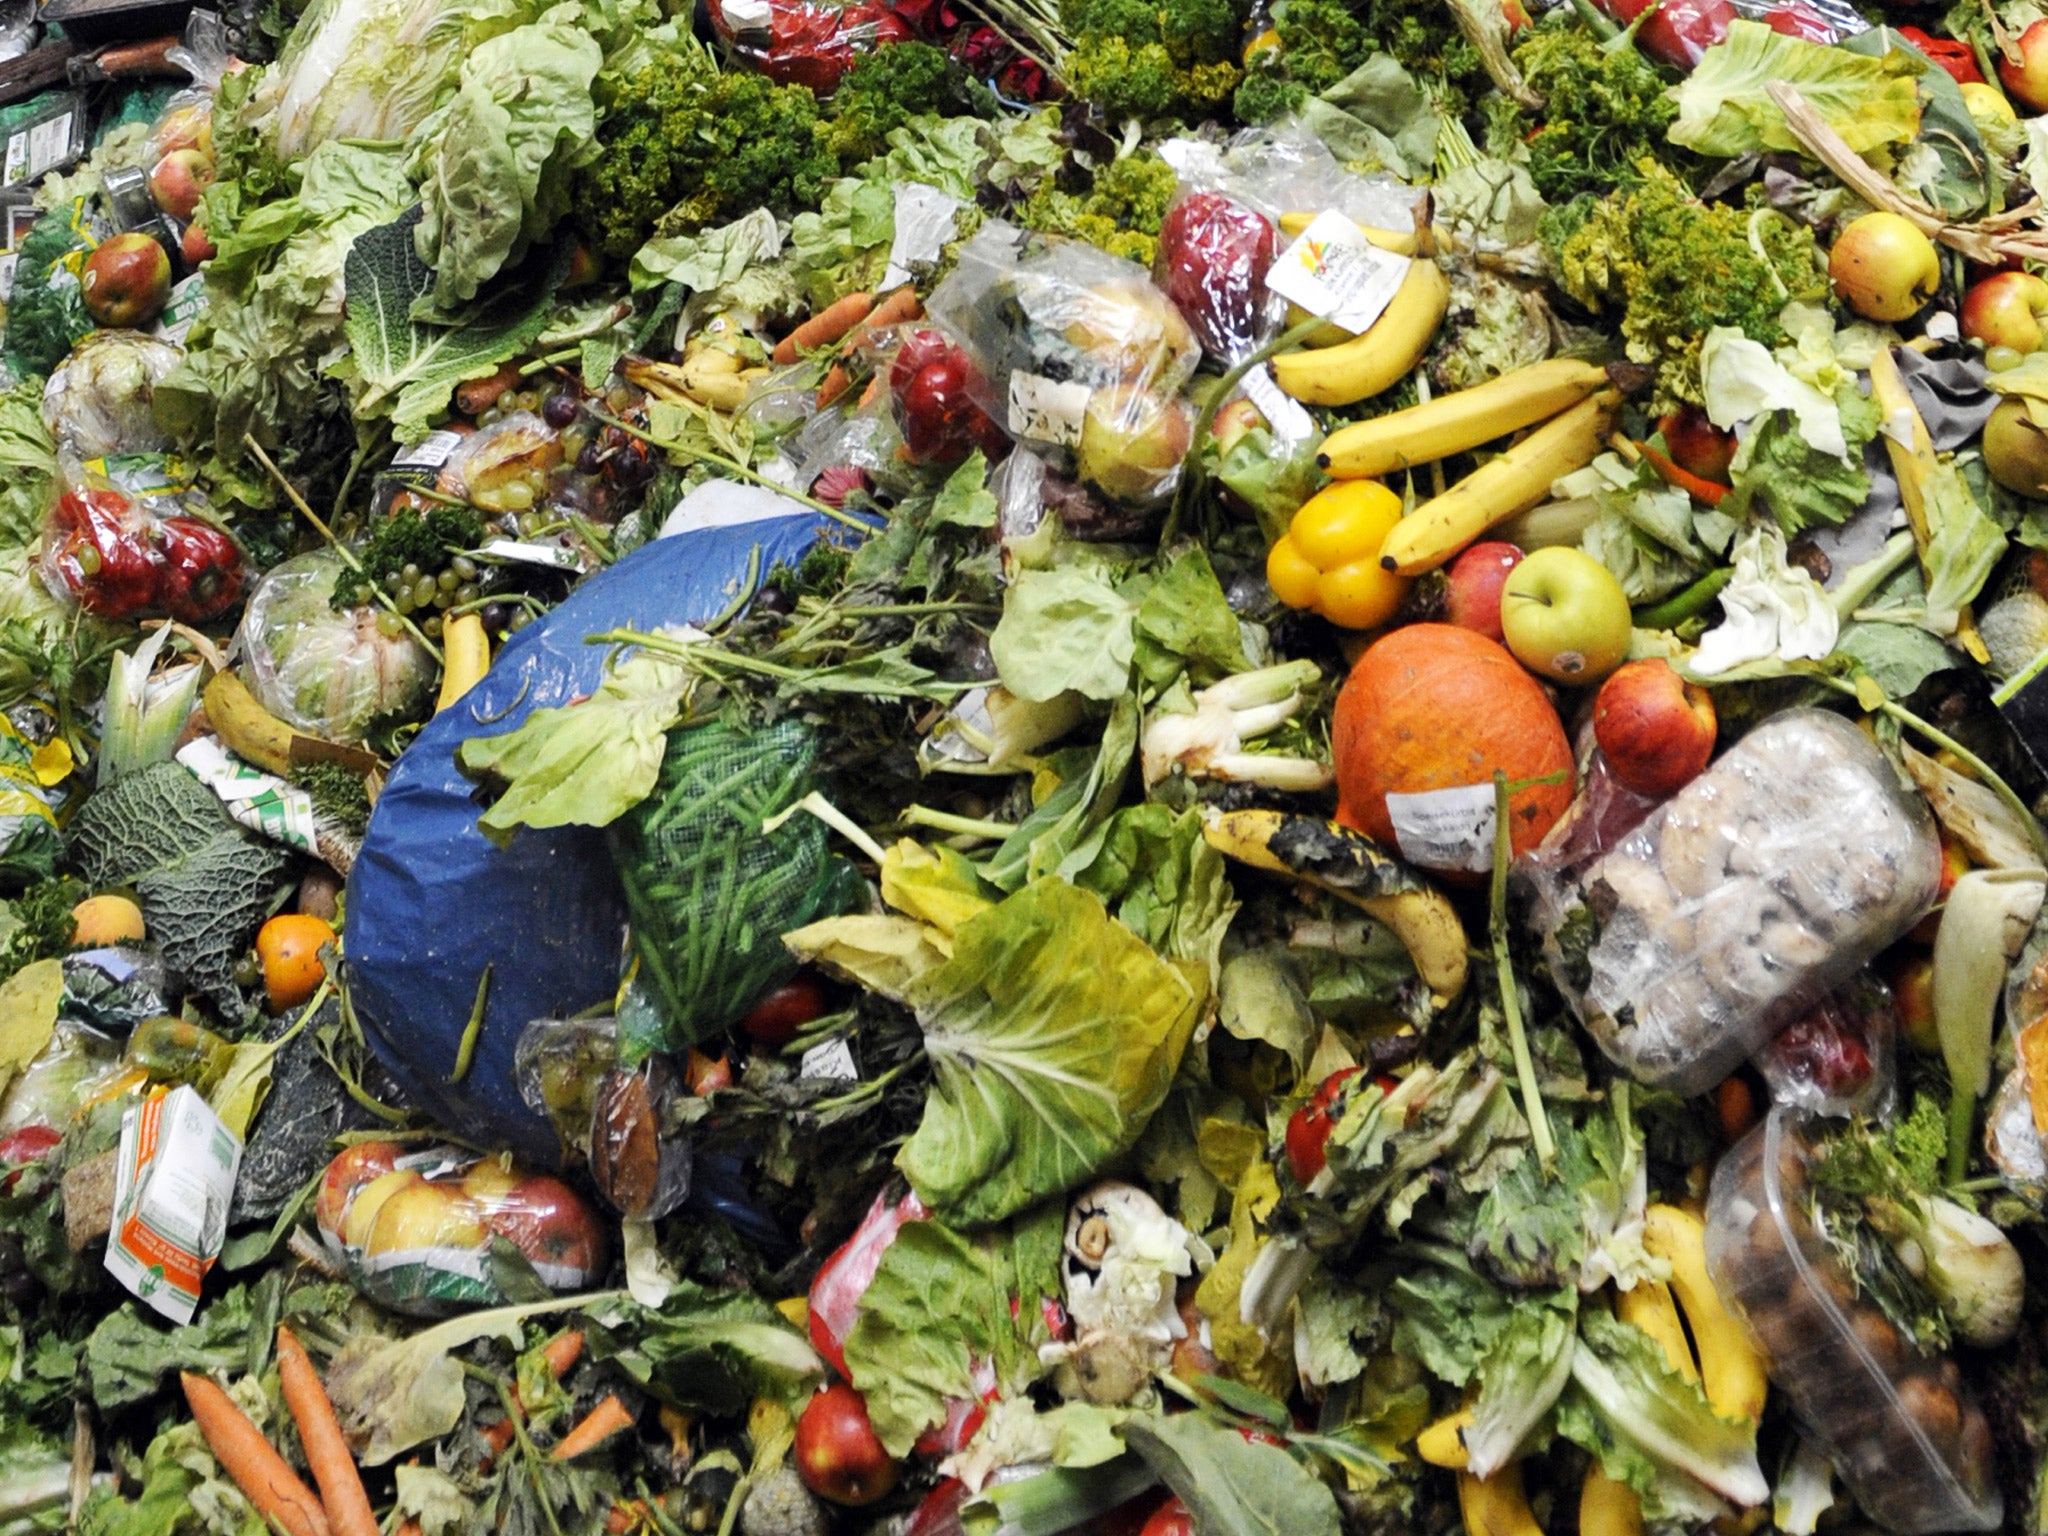 Food waste in the home accounts for about half of national waste